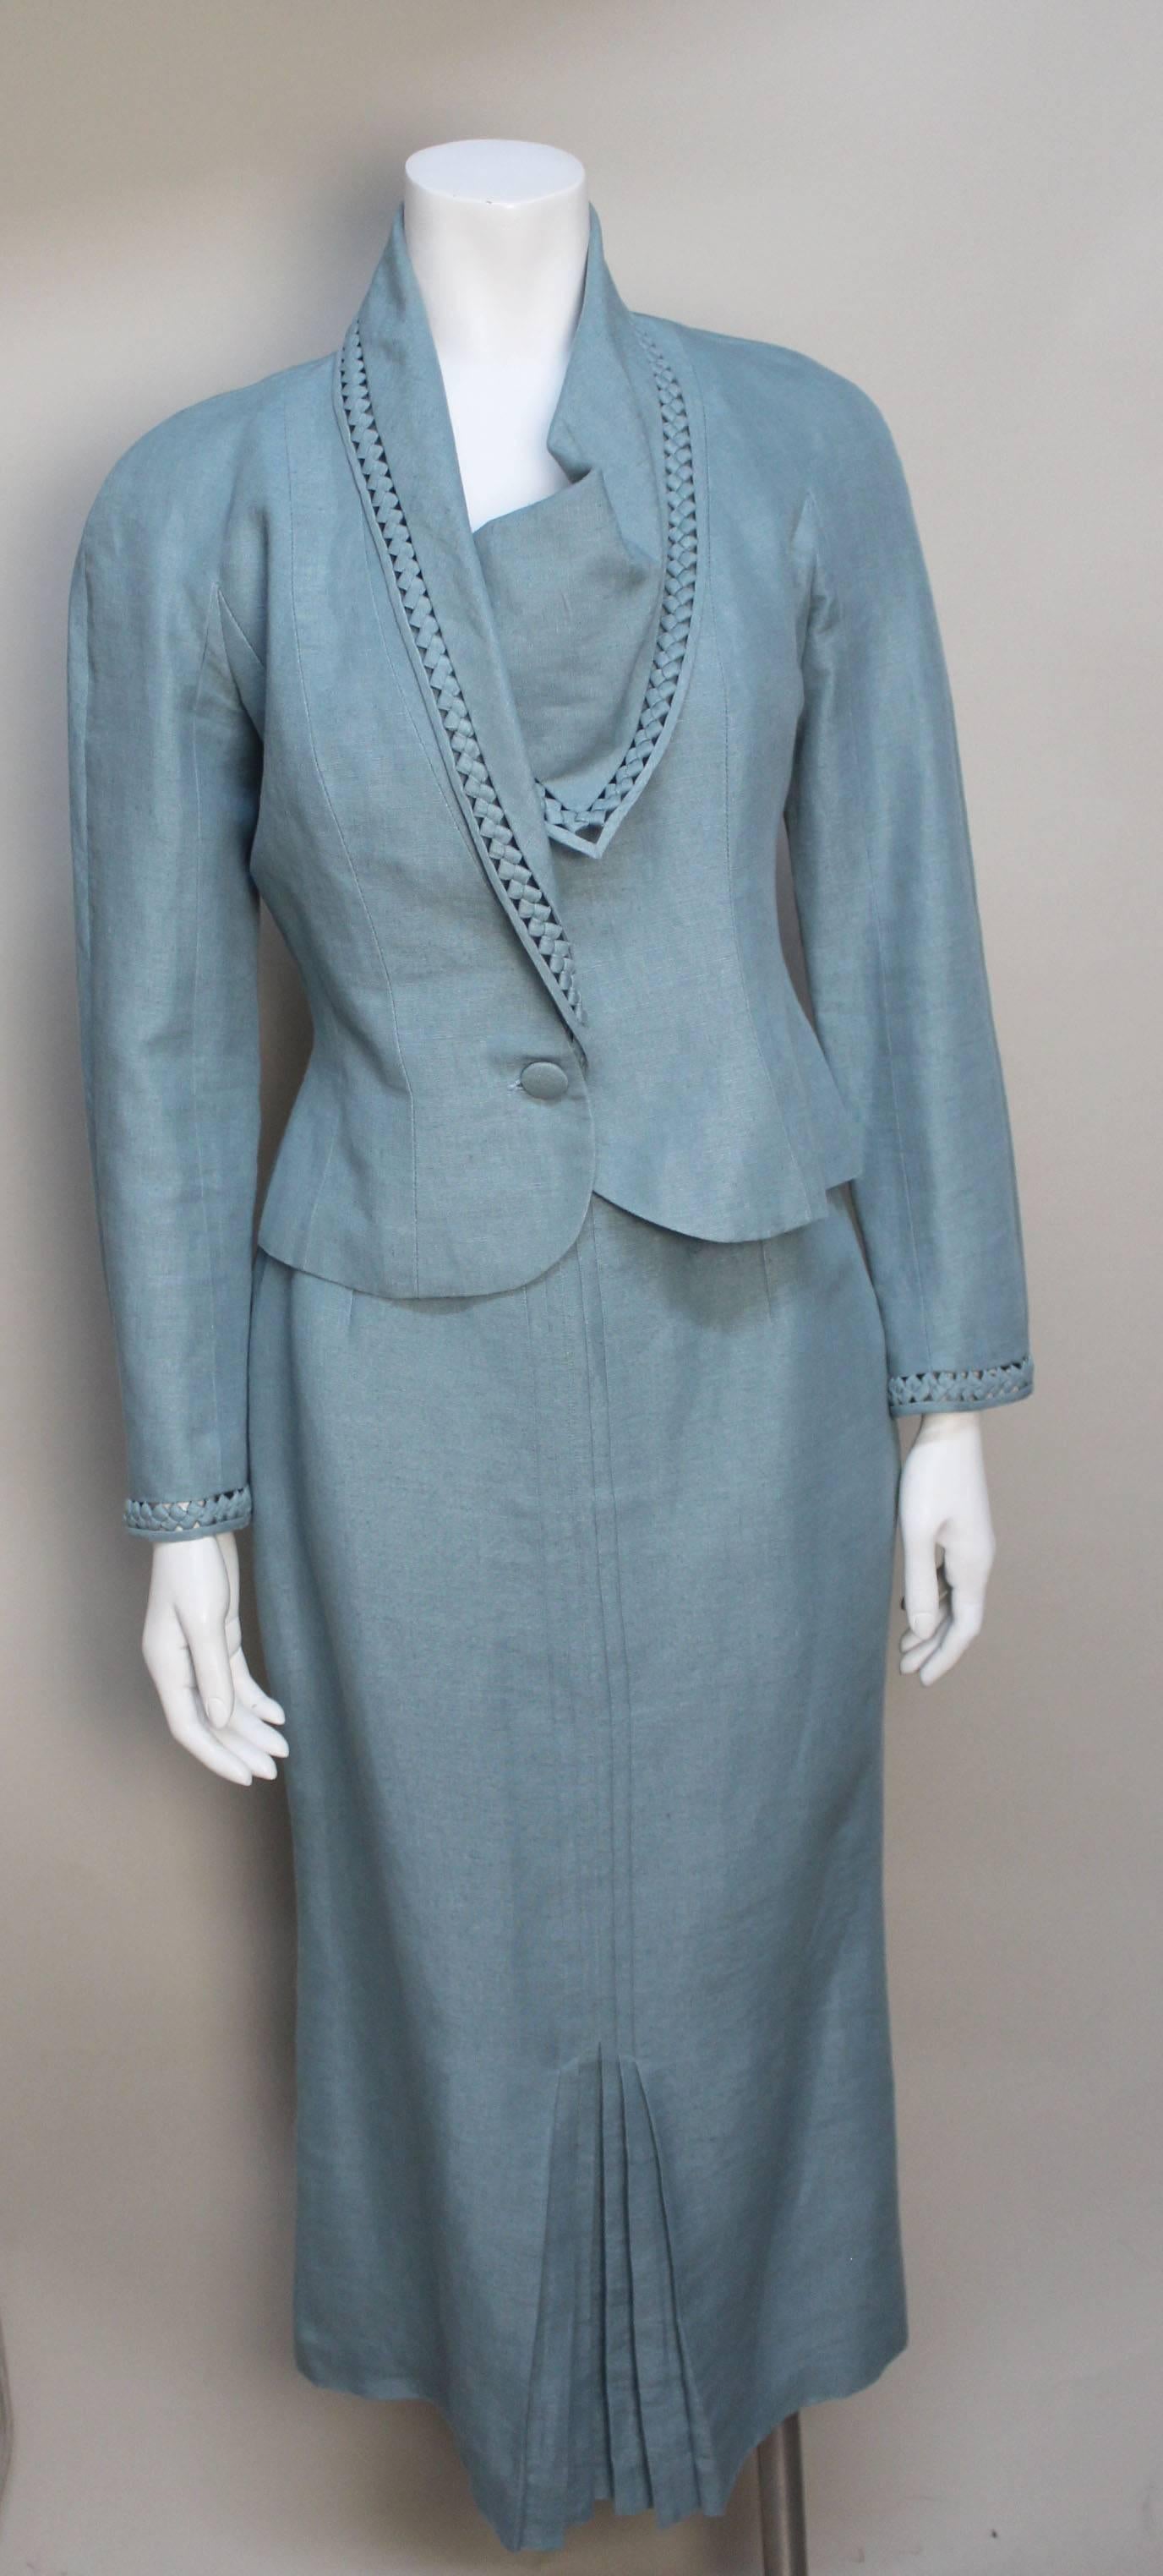 This womans two piece suit with skirt has many wonderful details. The suit is made of a fine slate blue linen completely lined in silk. The fitted skirt ends mid-calf with a kick pleated front. The jacket drapes beautifully with an asymmetrical